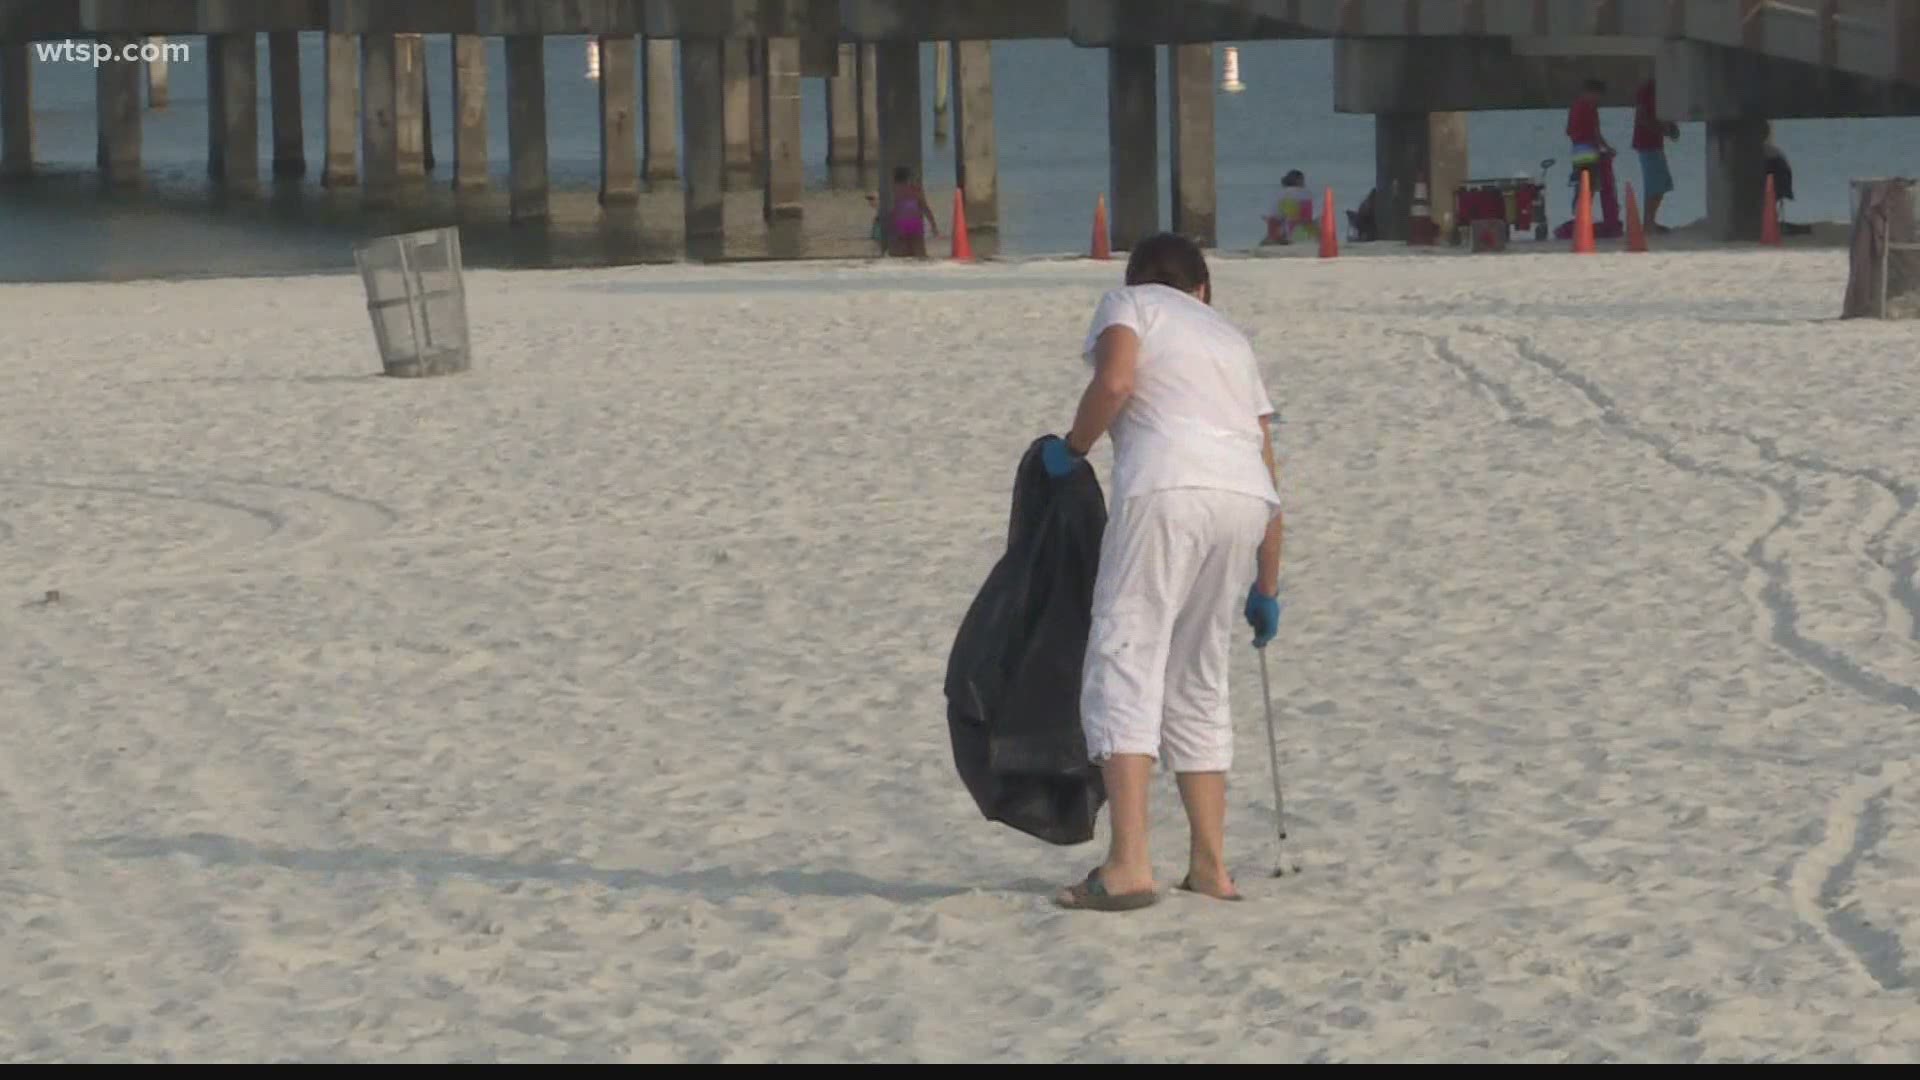 Volunteer groups that usually clean beach trash are unable to help due to quarantine safety rules.